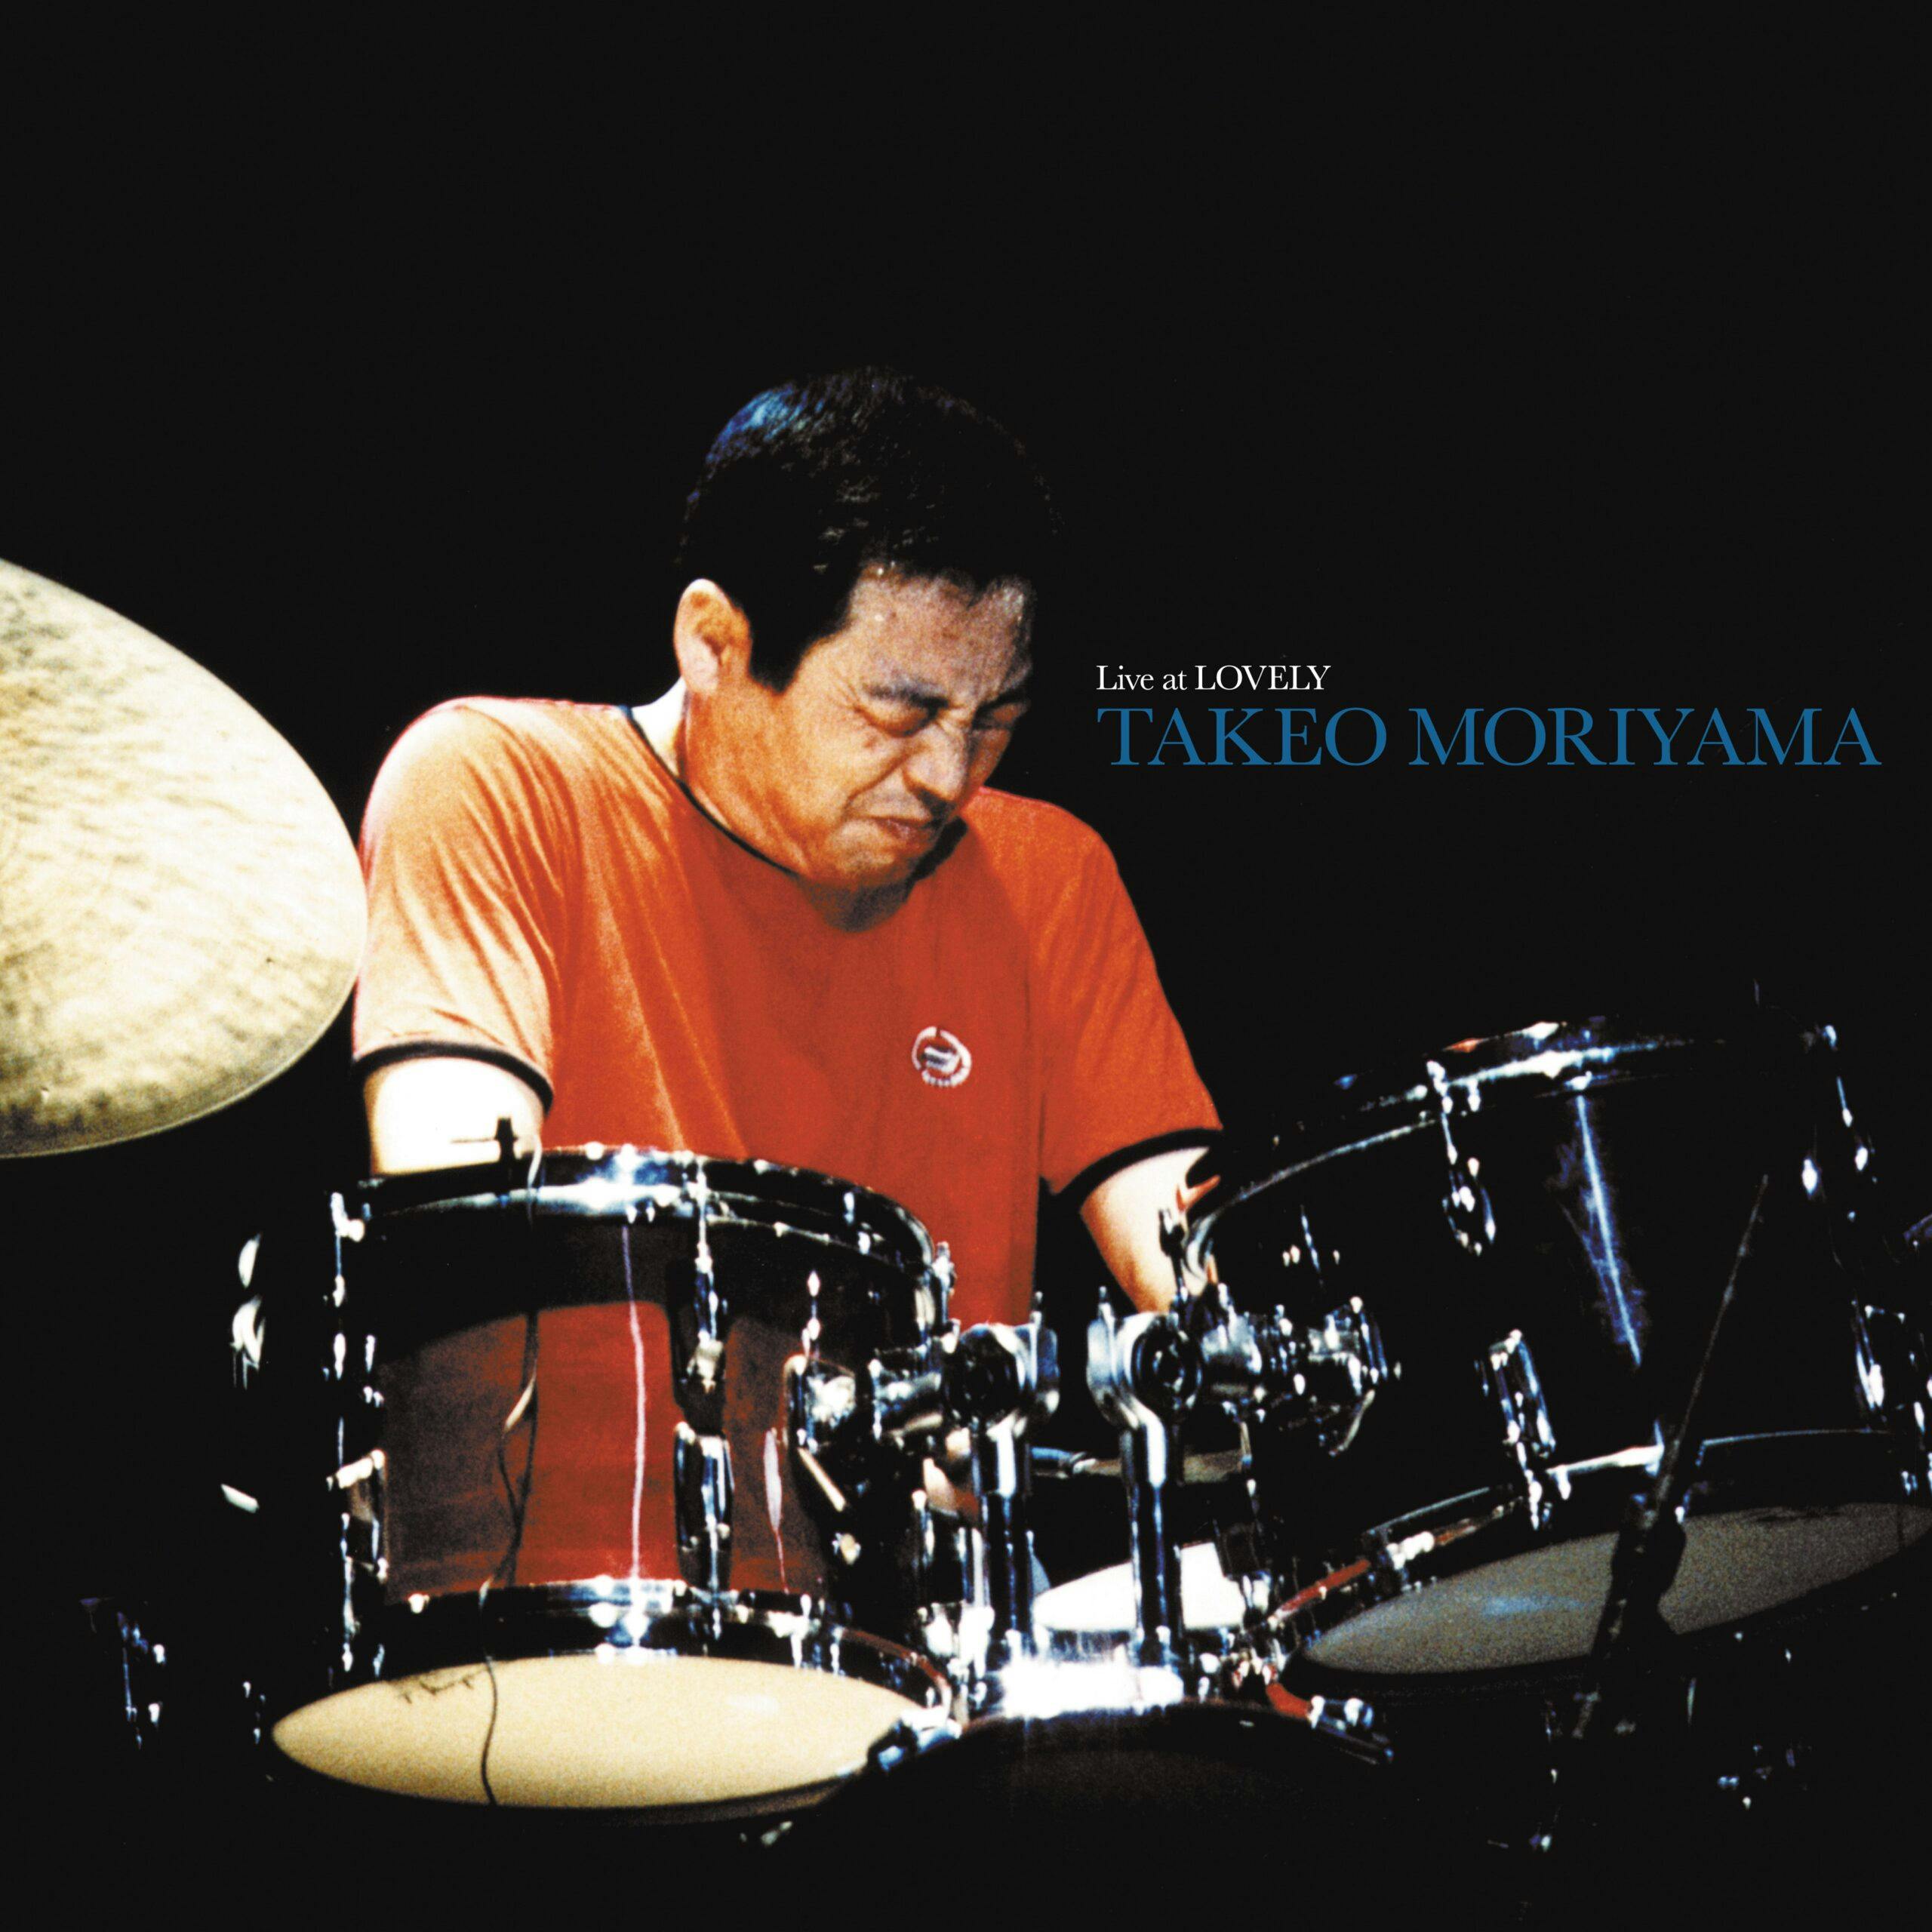 Japanese master drummer Takeo Moriyama returns to BBE Music’s J Jazz Masterclass Series in a majestic live set showcasing his exemplary musicianship and stature as one of the leading names in Japanese modern jazz.